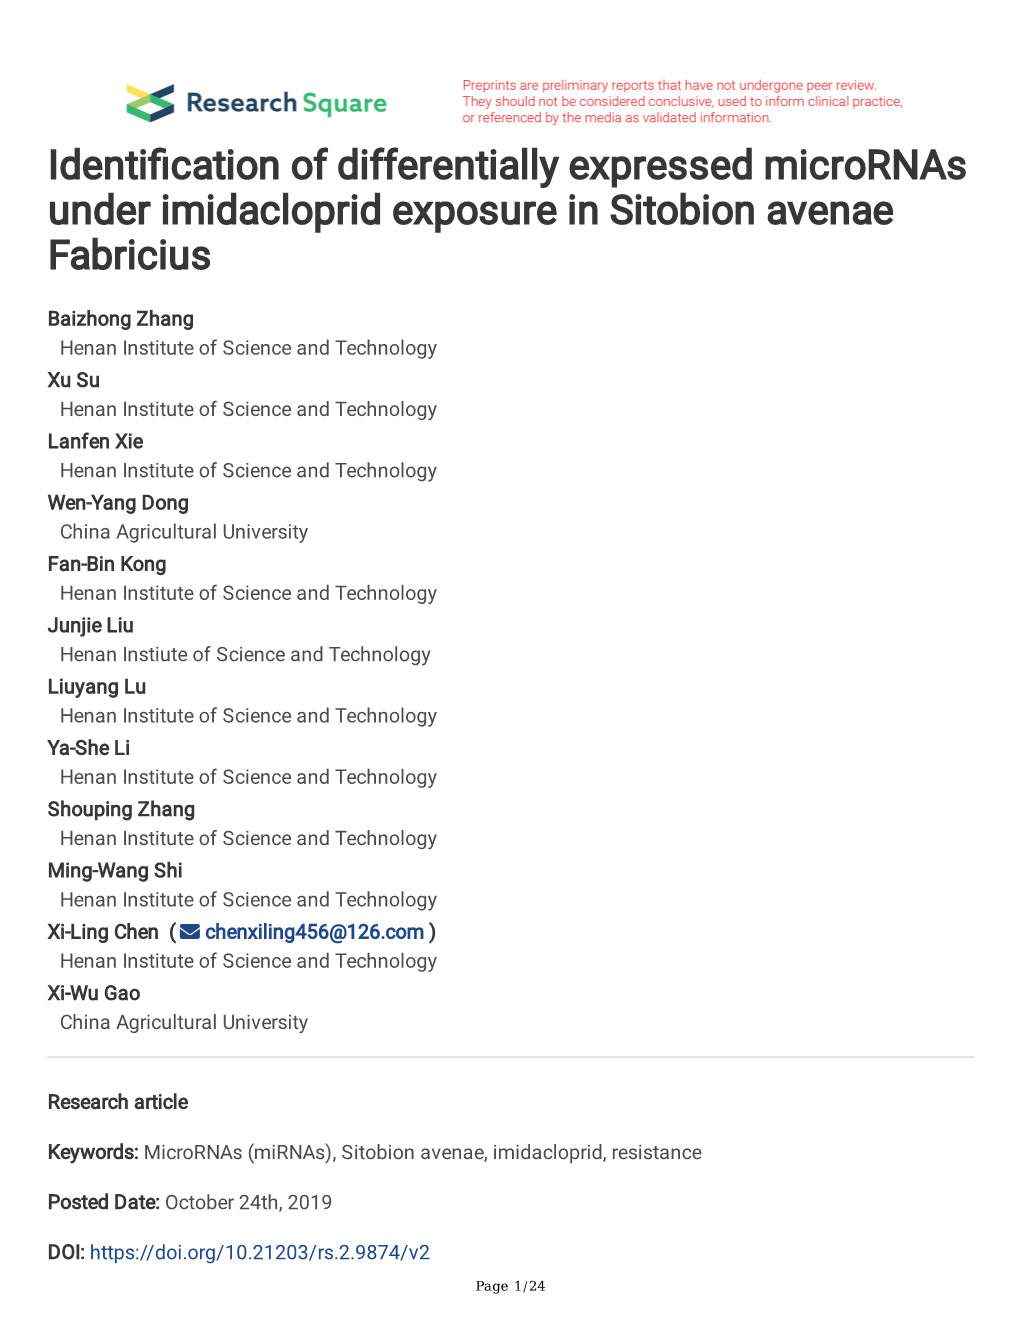 Identification of Differentially Expressed Micrornas Under Imidacloprid Exposure in Sitobion Avenae Fabricius